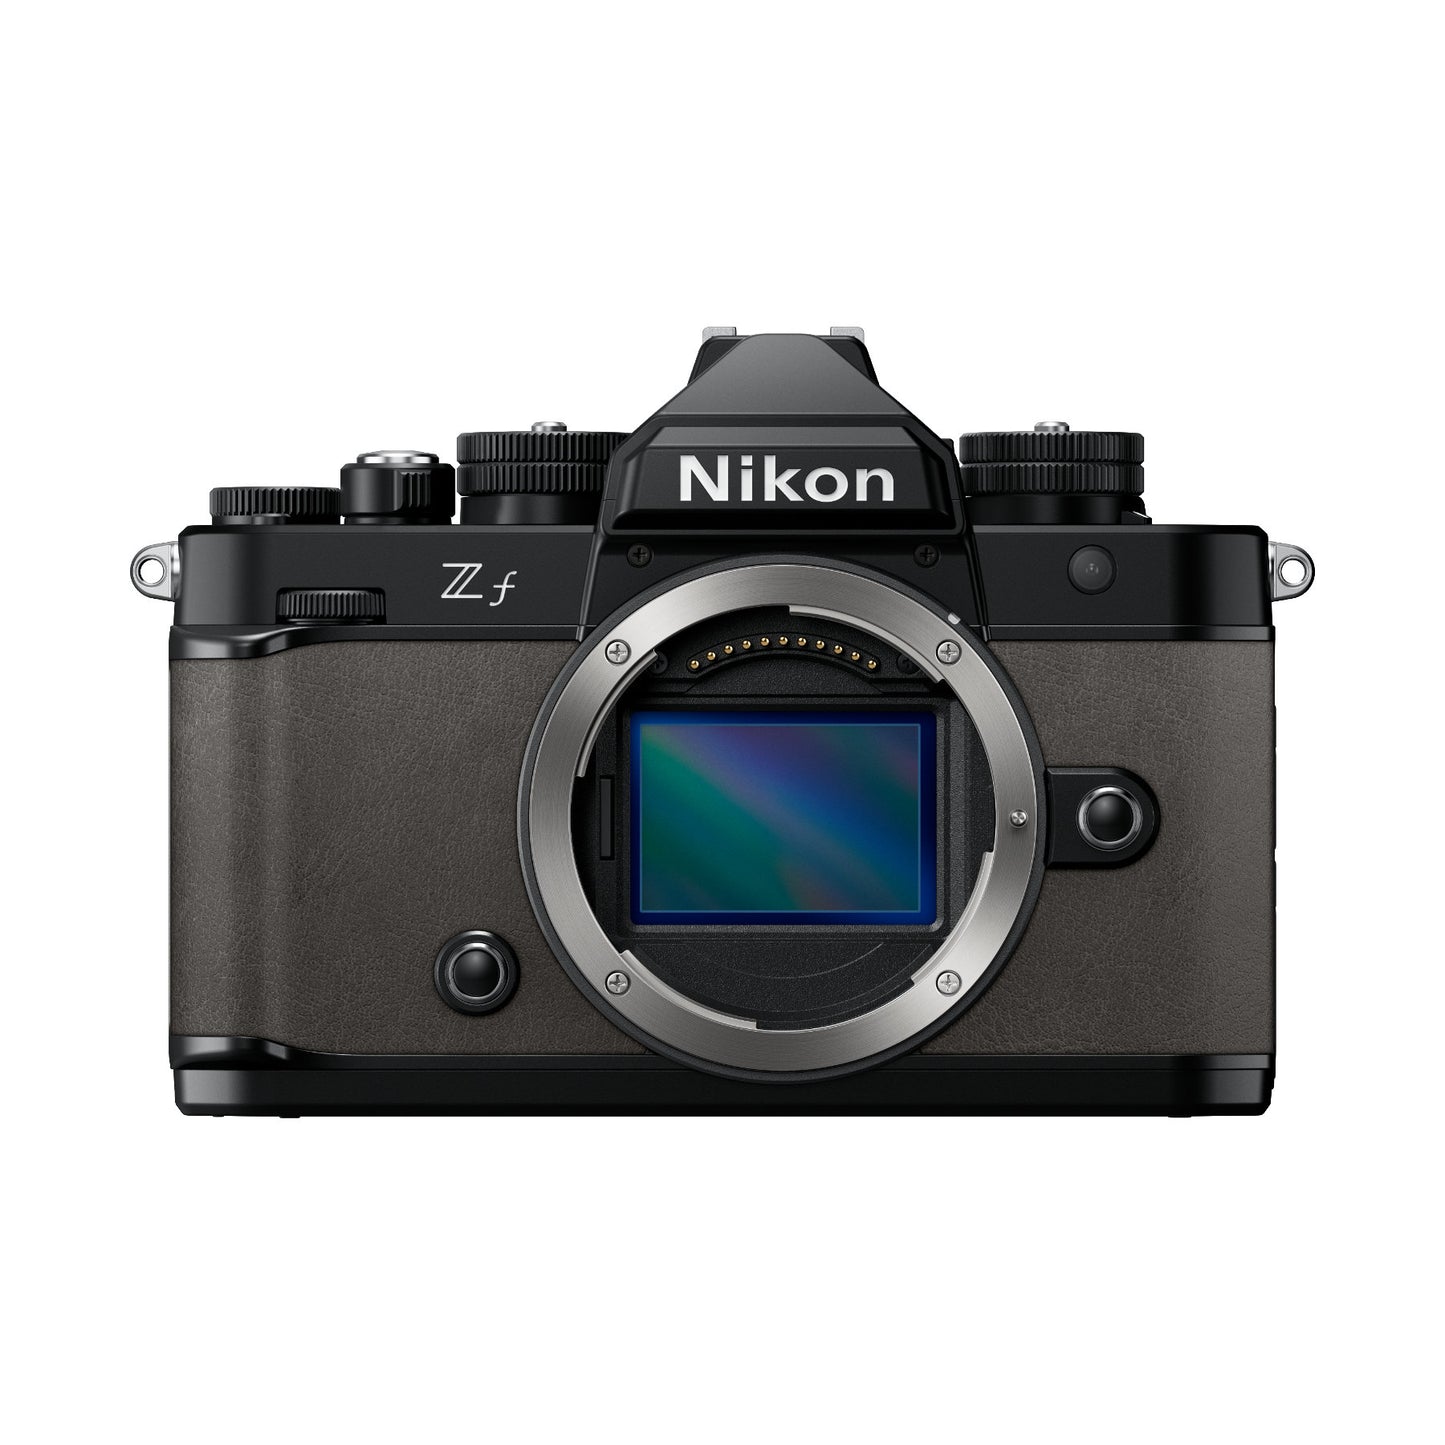 Buy Nikon Zf Mirrorless Camera (Body Only) at Topic Store